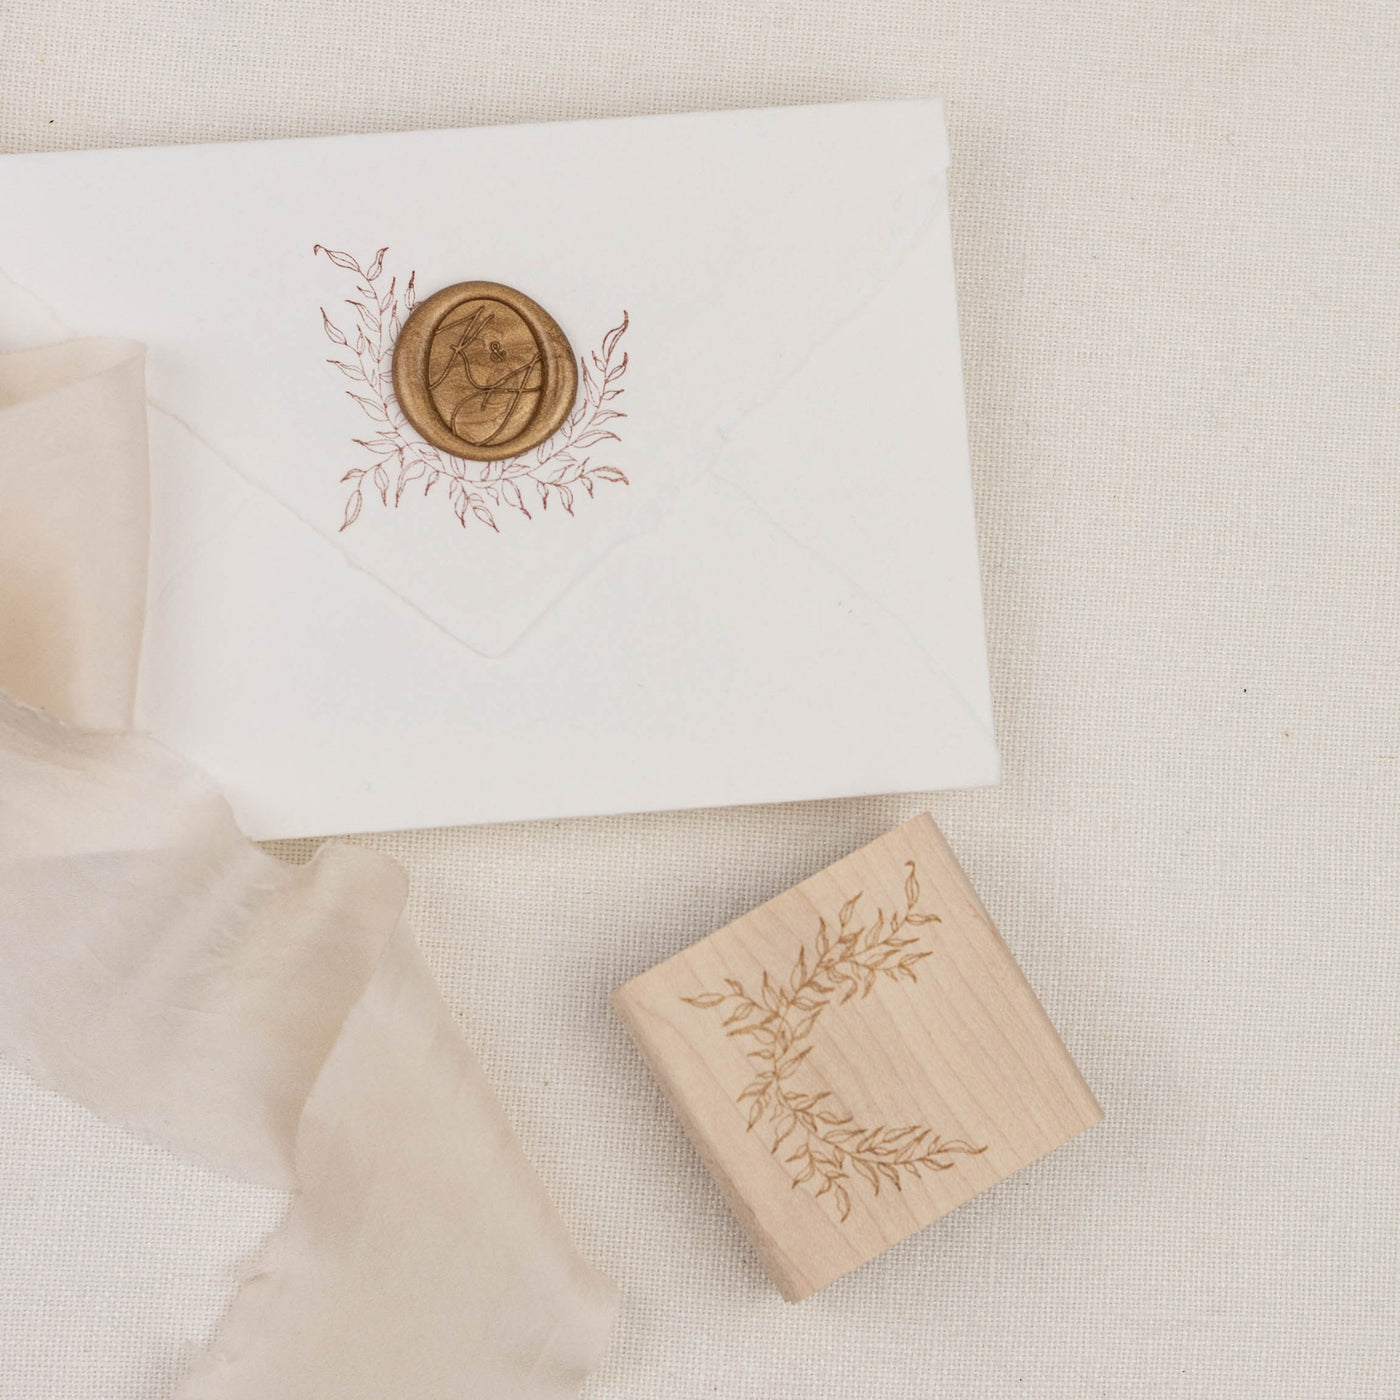 FALLING LEAVES OVAL WAX SEAL STAMP - KIMBERLEY